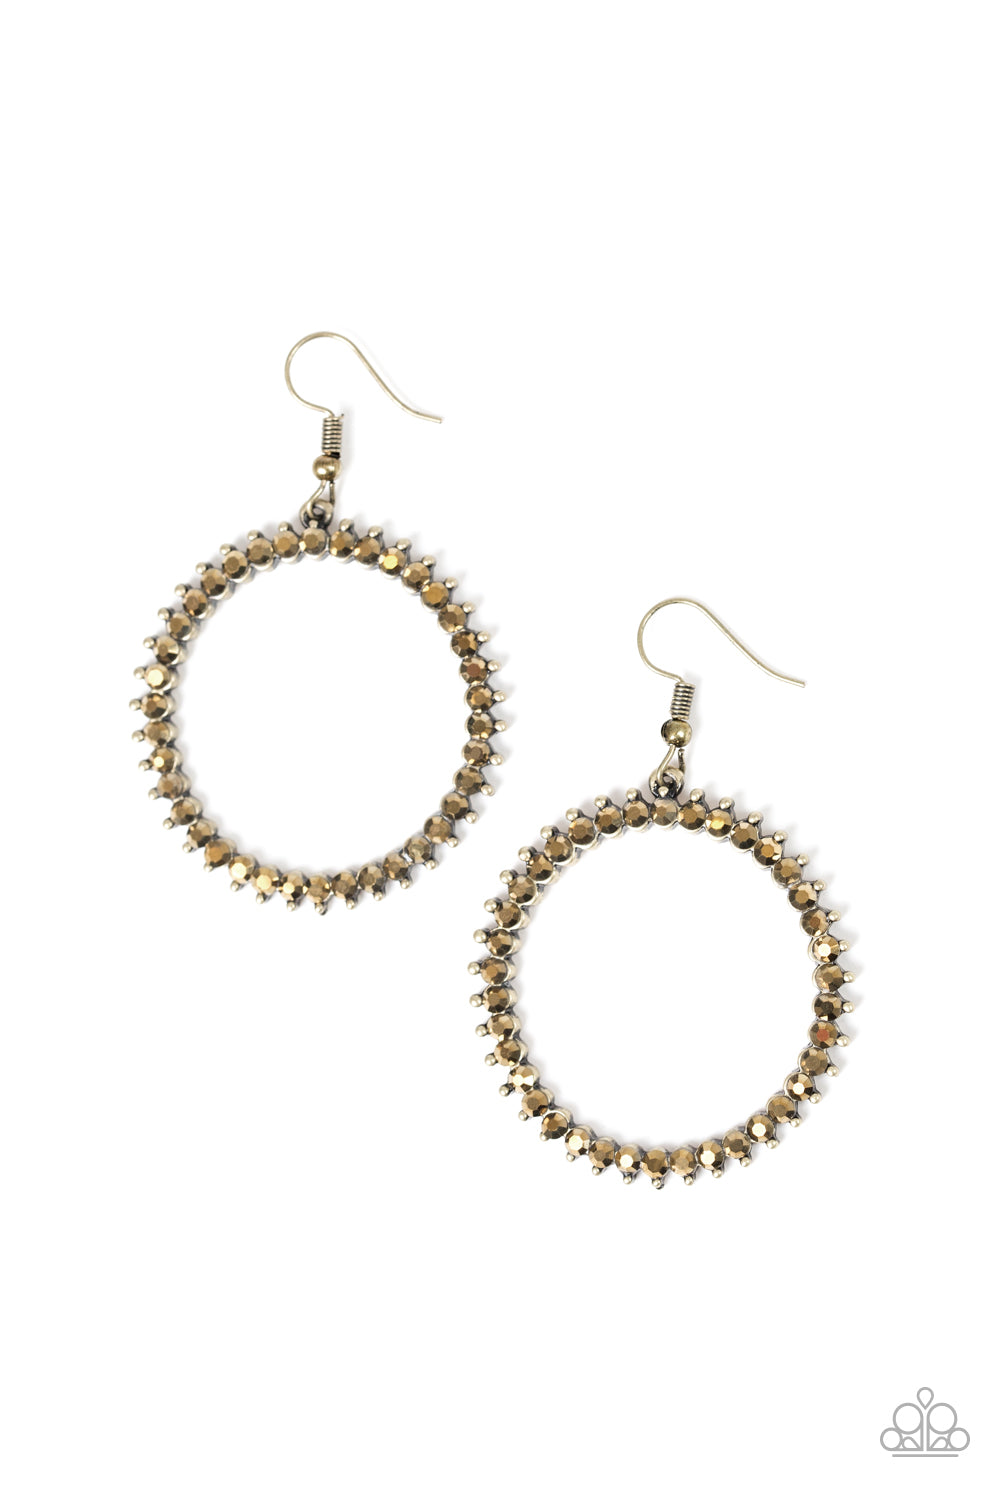 Paparazzi Spark Their Attention - Brass Rhinestones Earrings - $5 Jewelry With Ashley Swint